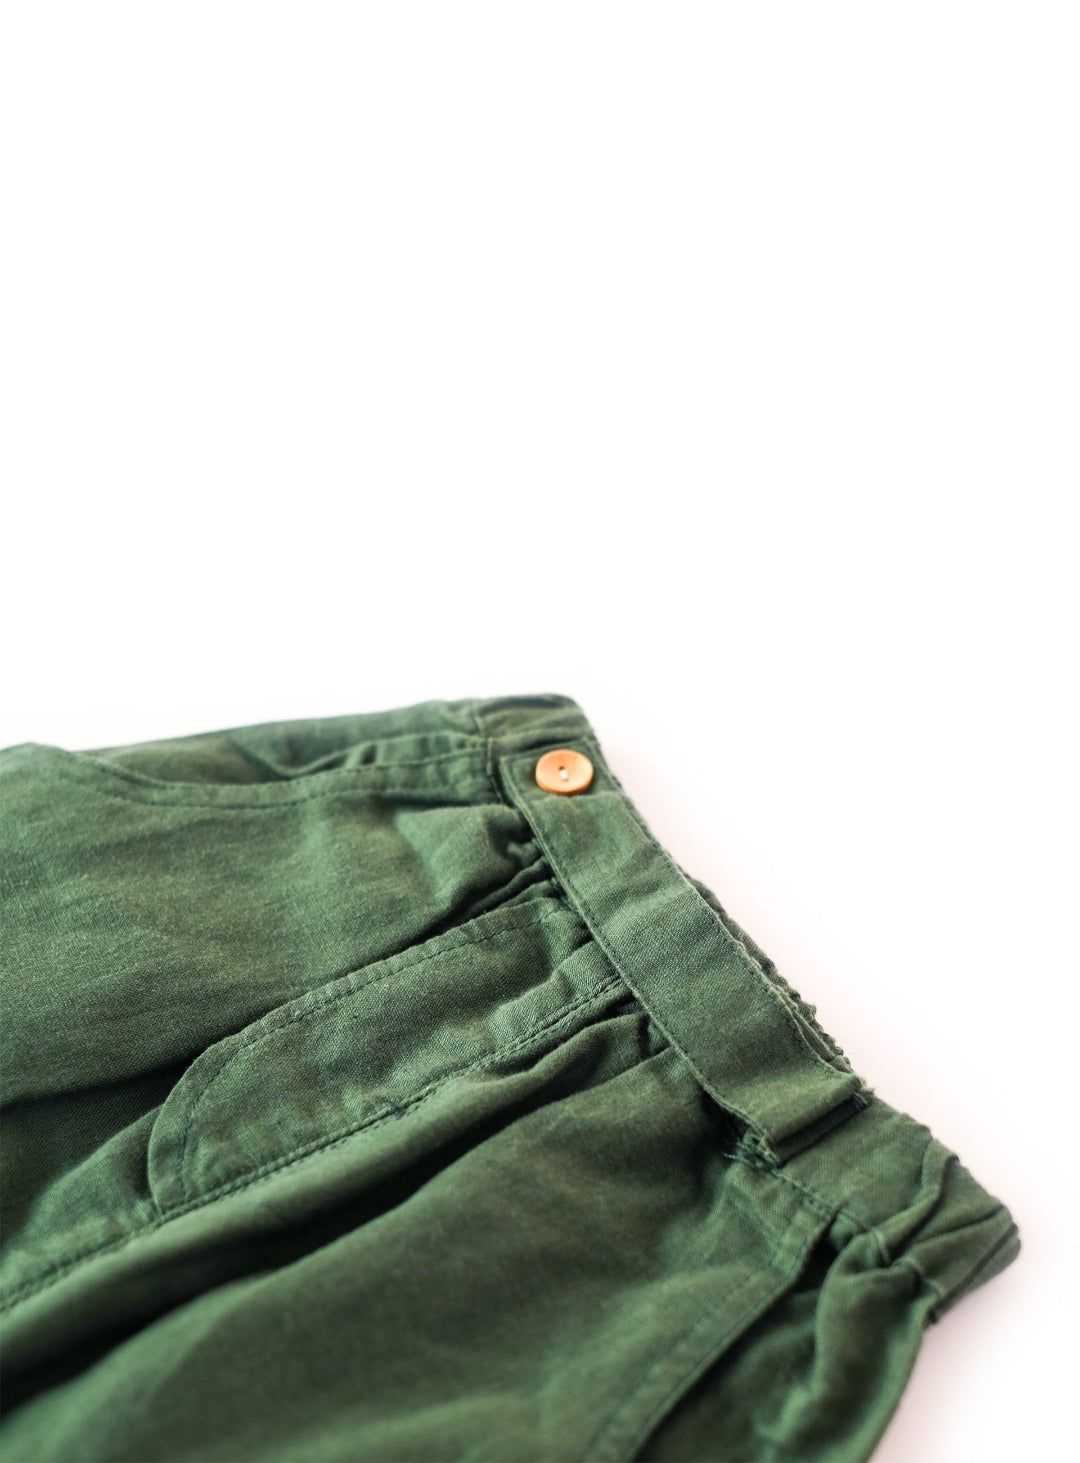 forest green pants with baggy cutting